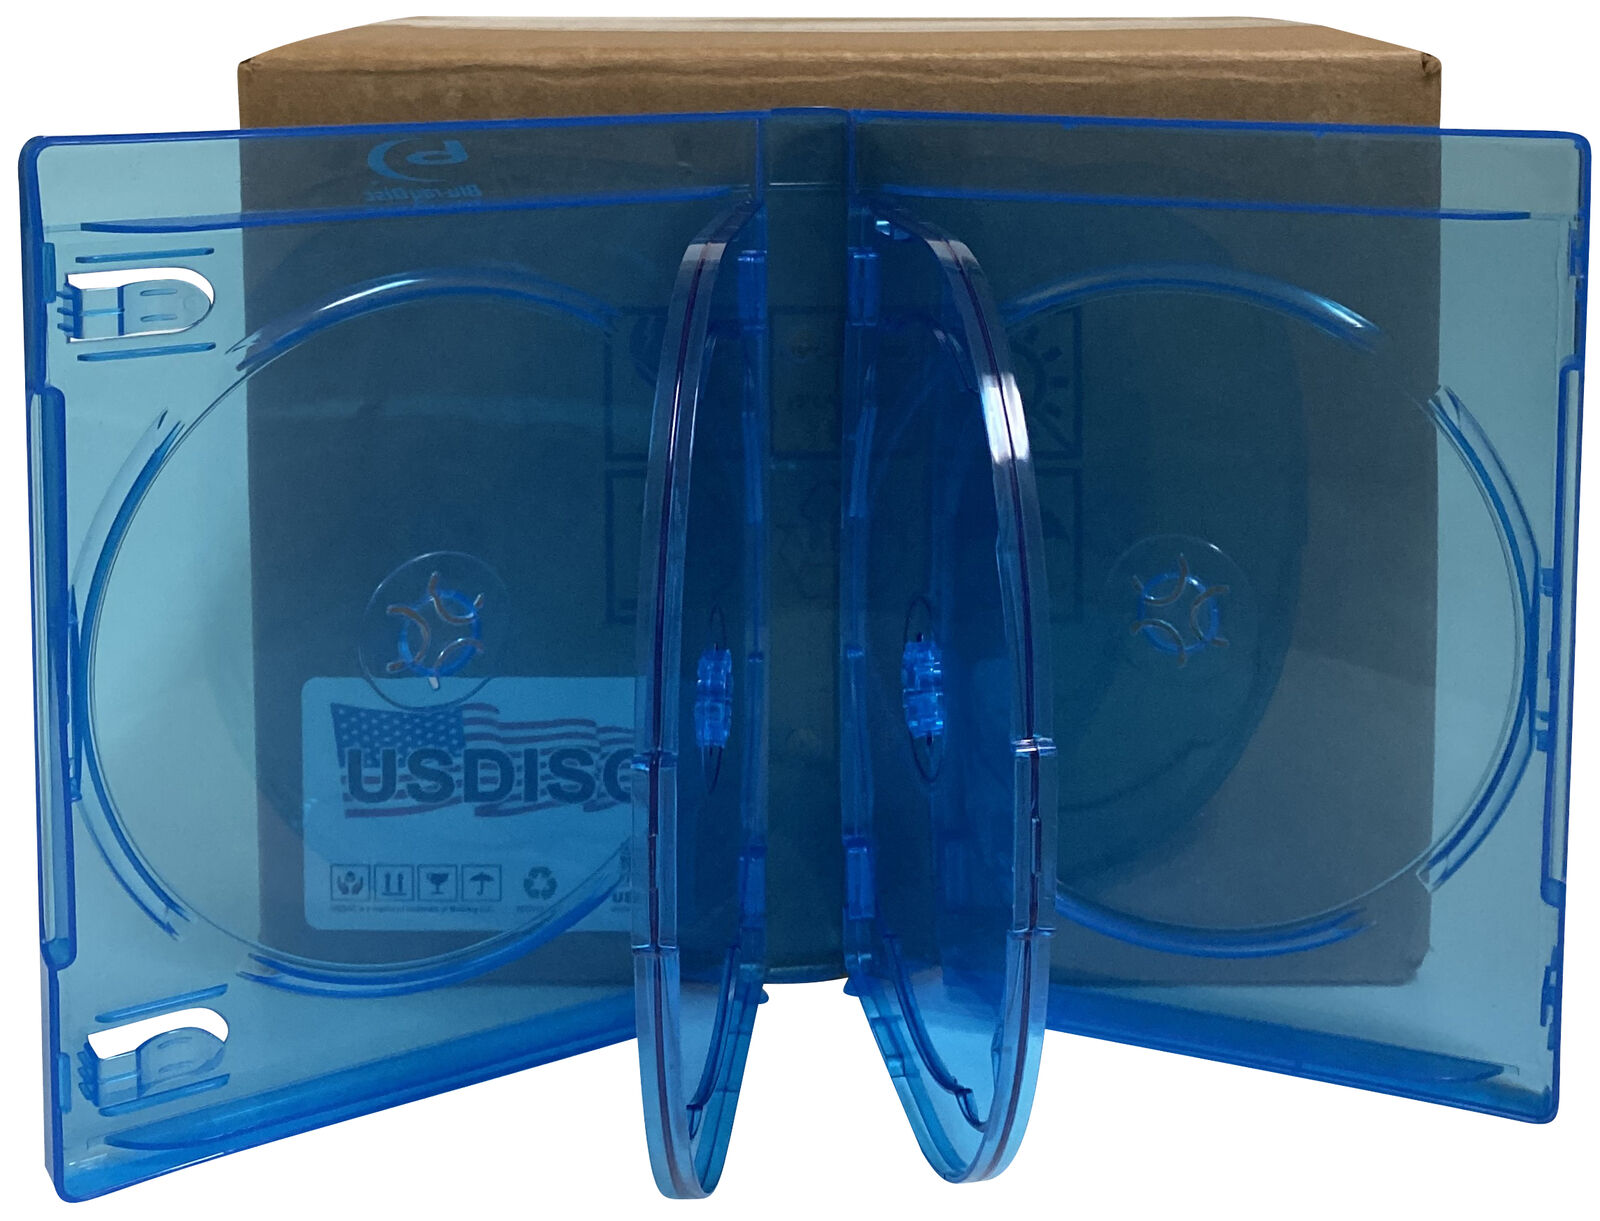 USDISC Blu-ray Cases Chubby 21mm, Sextuple 6 Disc (Clear Blue) Lot